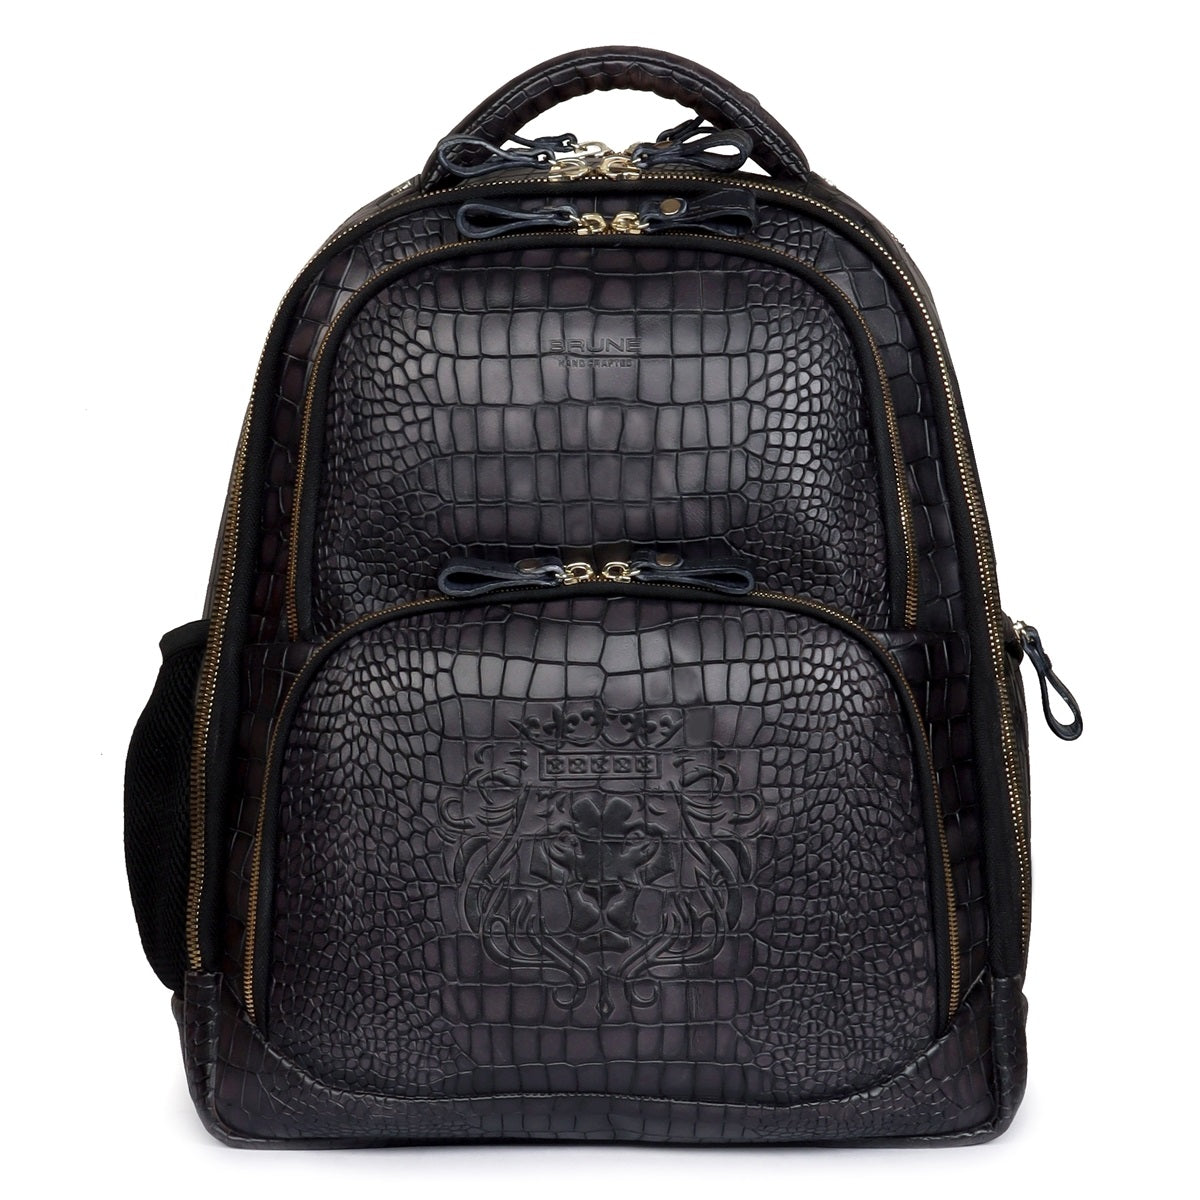 Smokey Grey Embossed Lion with Mini Lion Logo Croco Textured Hand Painted Leather Backpack by Brune & Bareskin